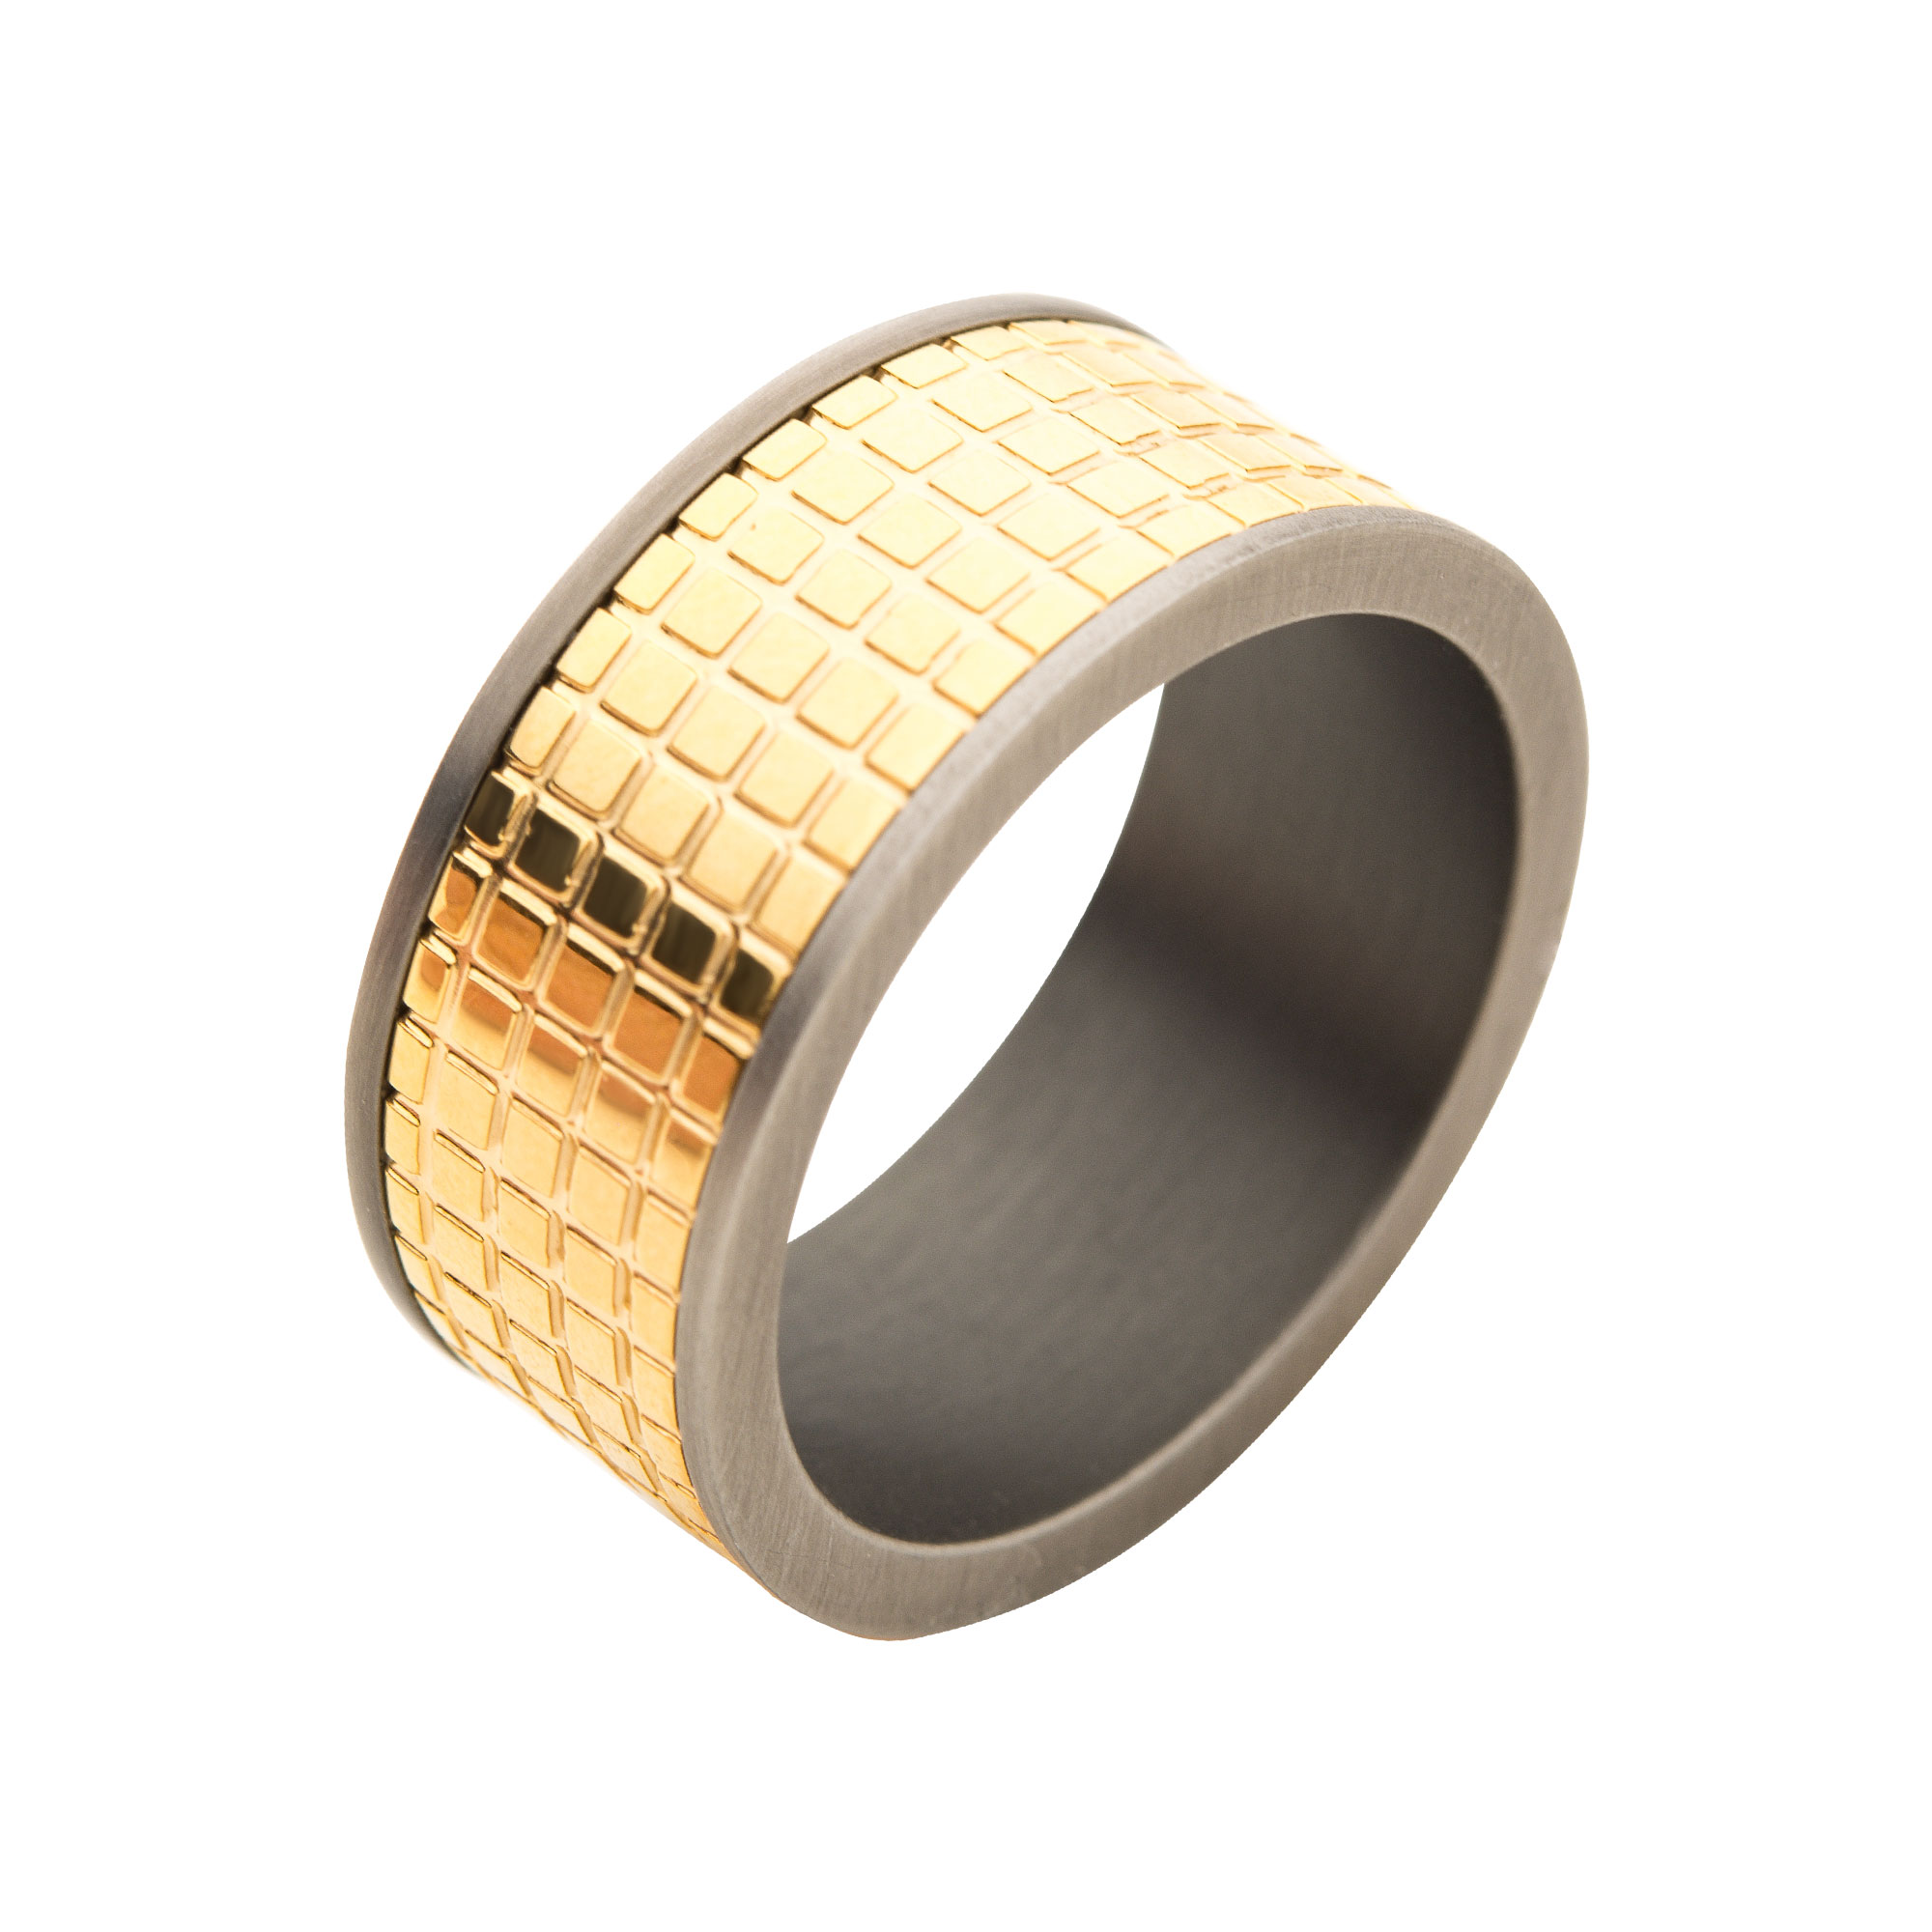 Gun Metal Plated with 18K Gold Plated Grid Inlay Ring Morin Jewelers Southbridge, MA